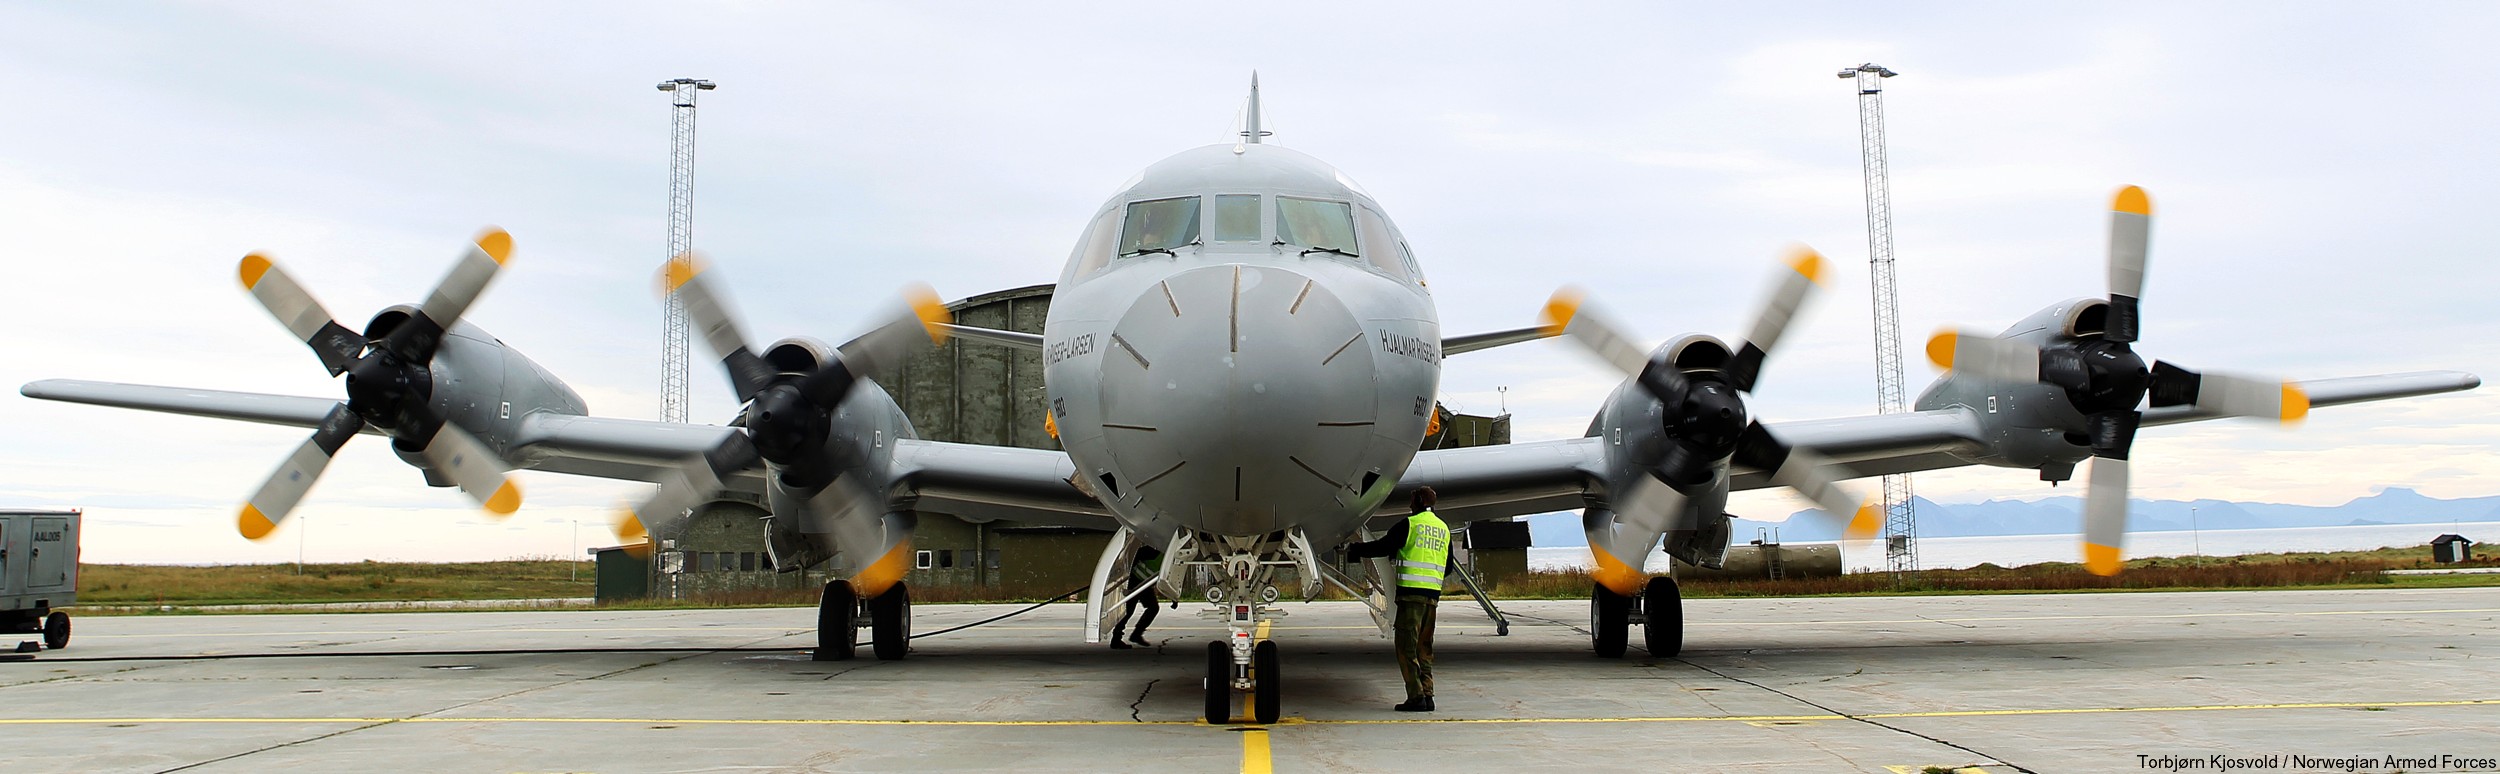 P-3N-Orion-6603-06